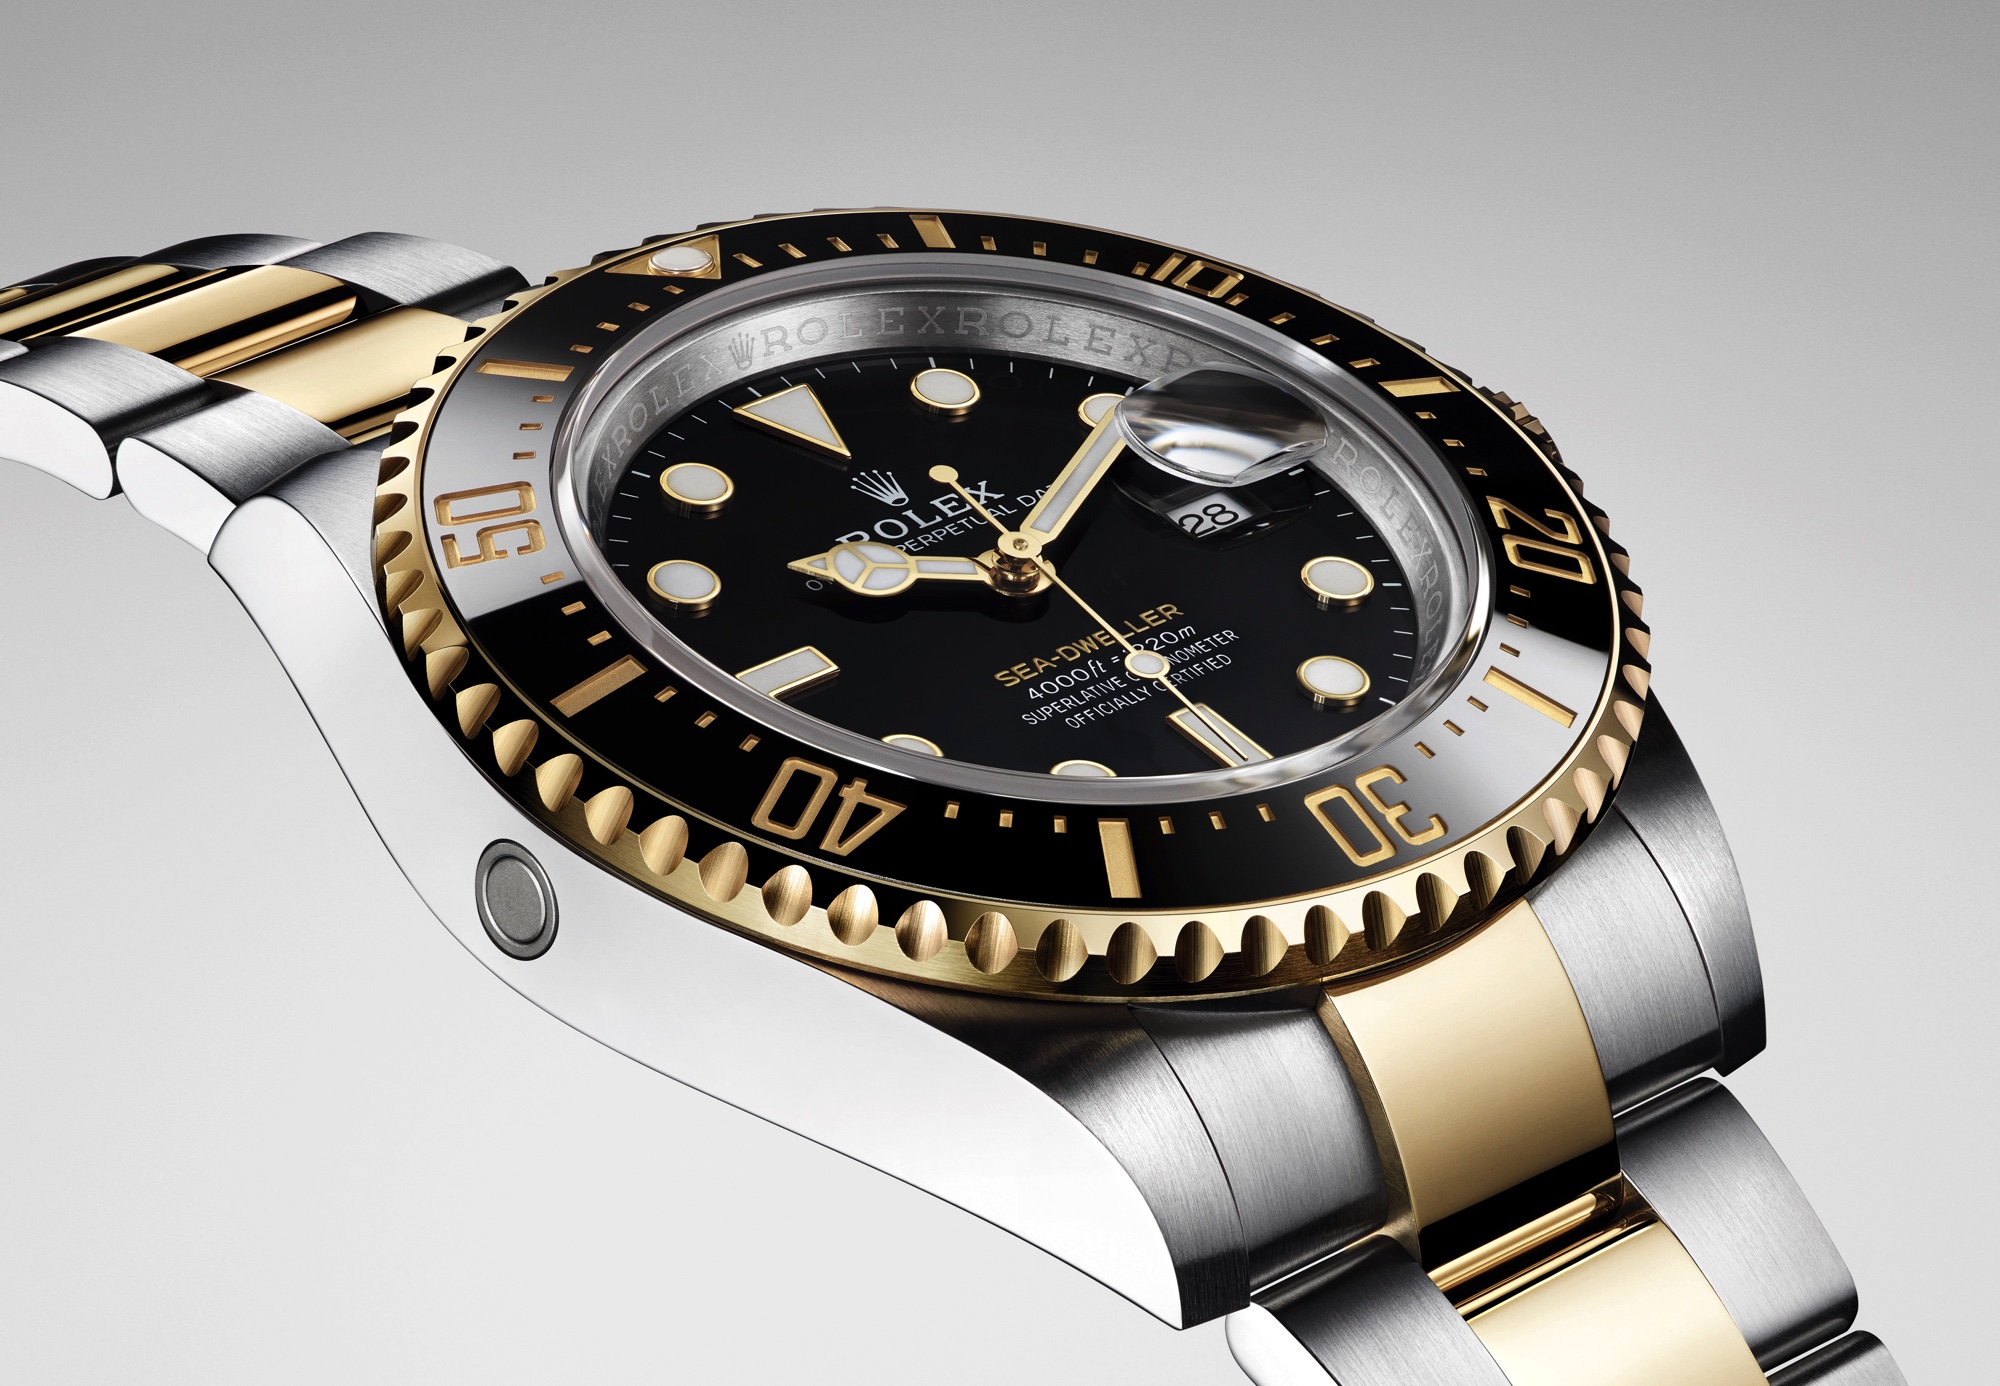 The new Rolex \